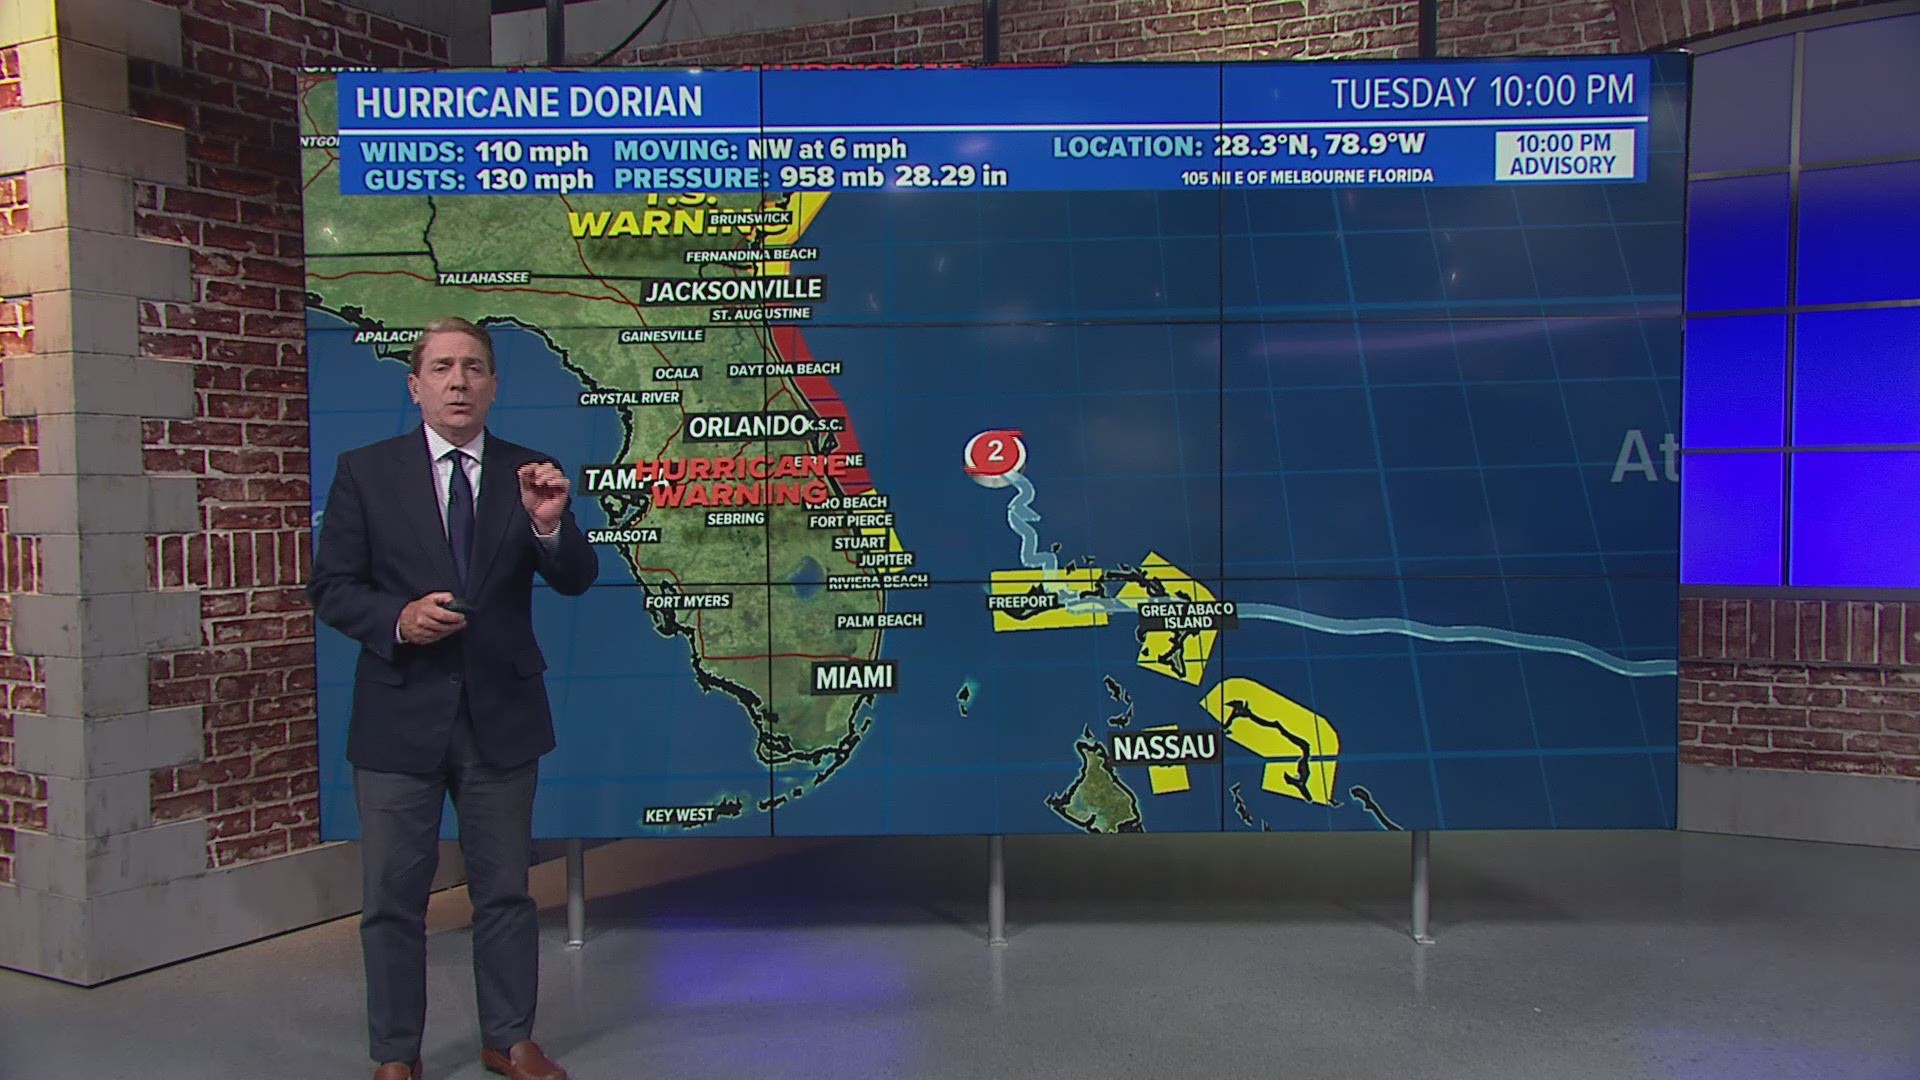 Dorian looks to ride along the southeastern coast and could make landfall as a weaker hurricane in the Carolinas.